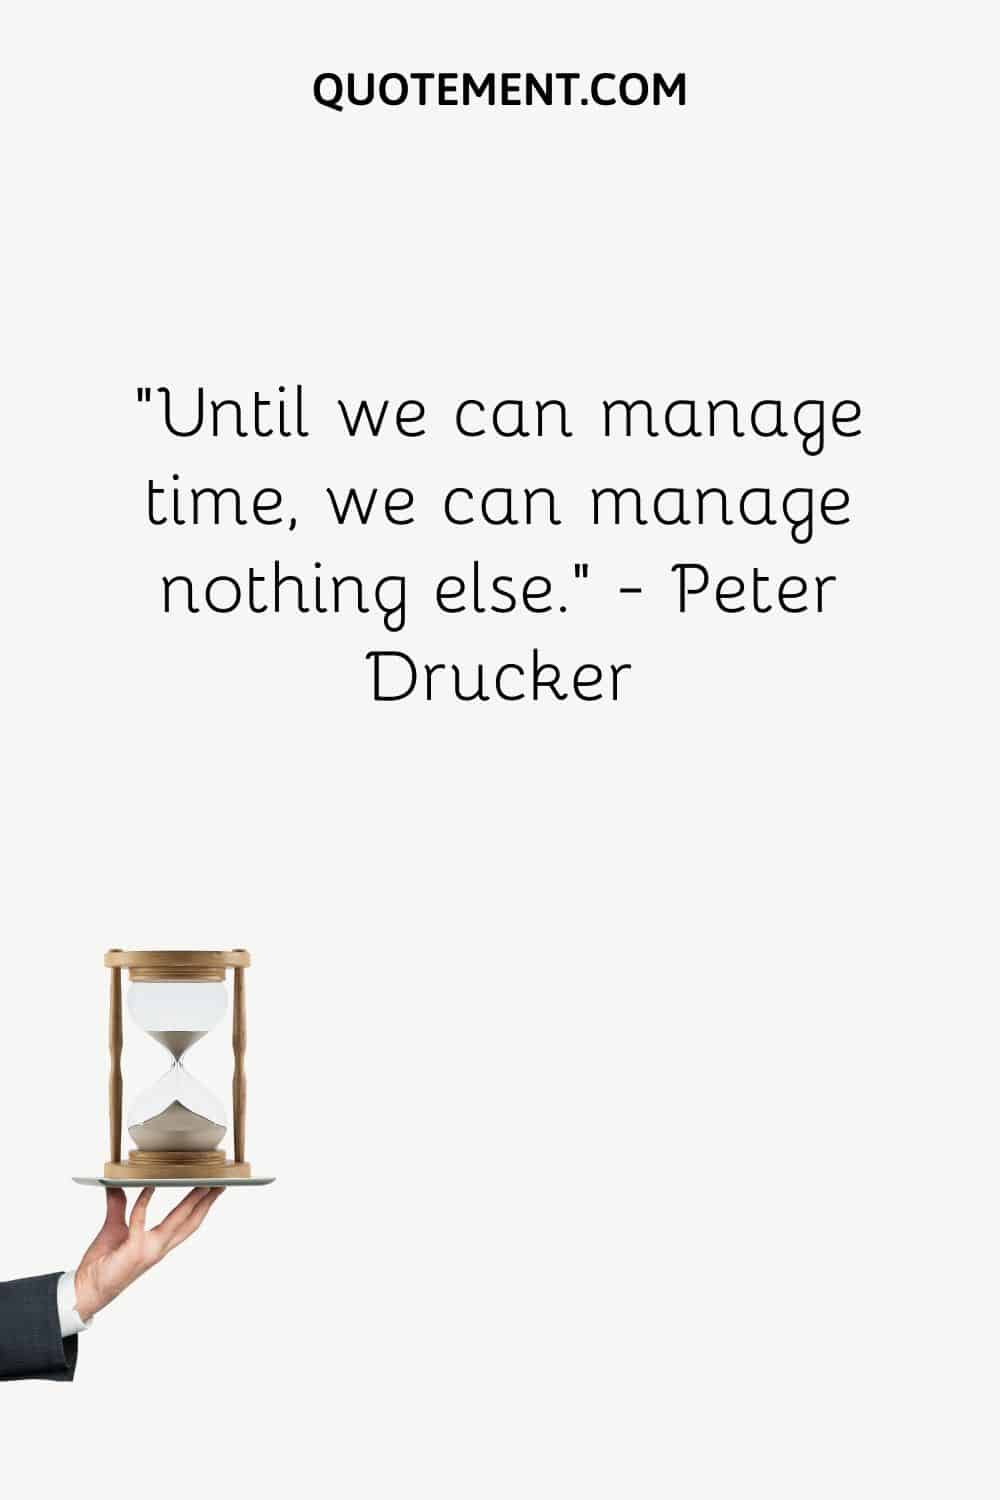 Until we can manage time, we can manage nothing else